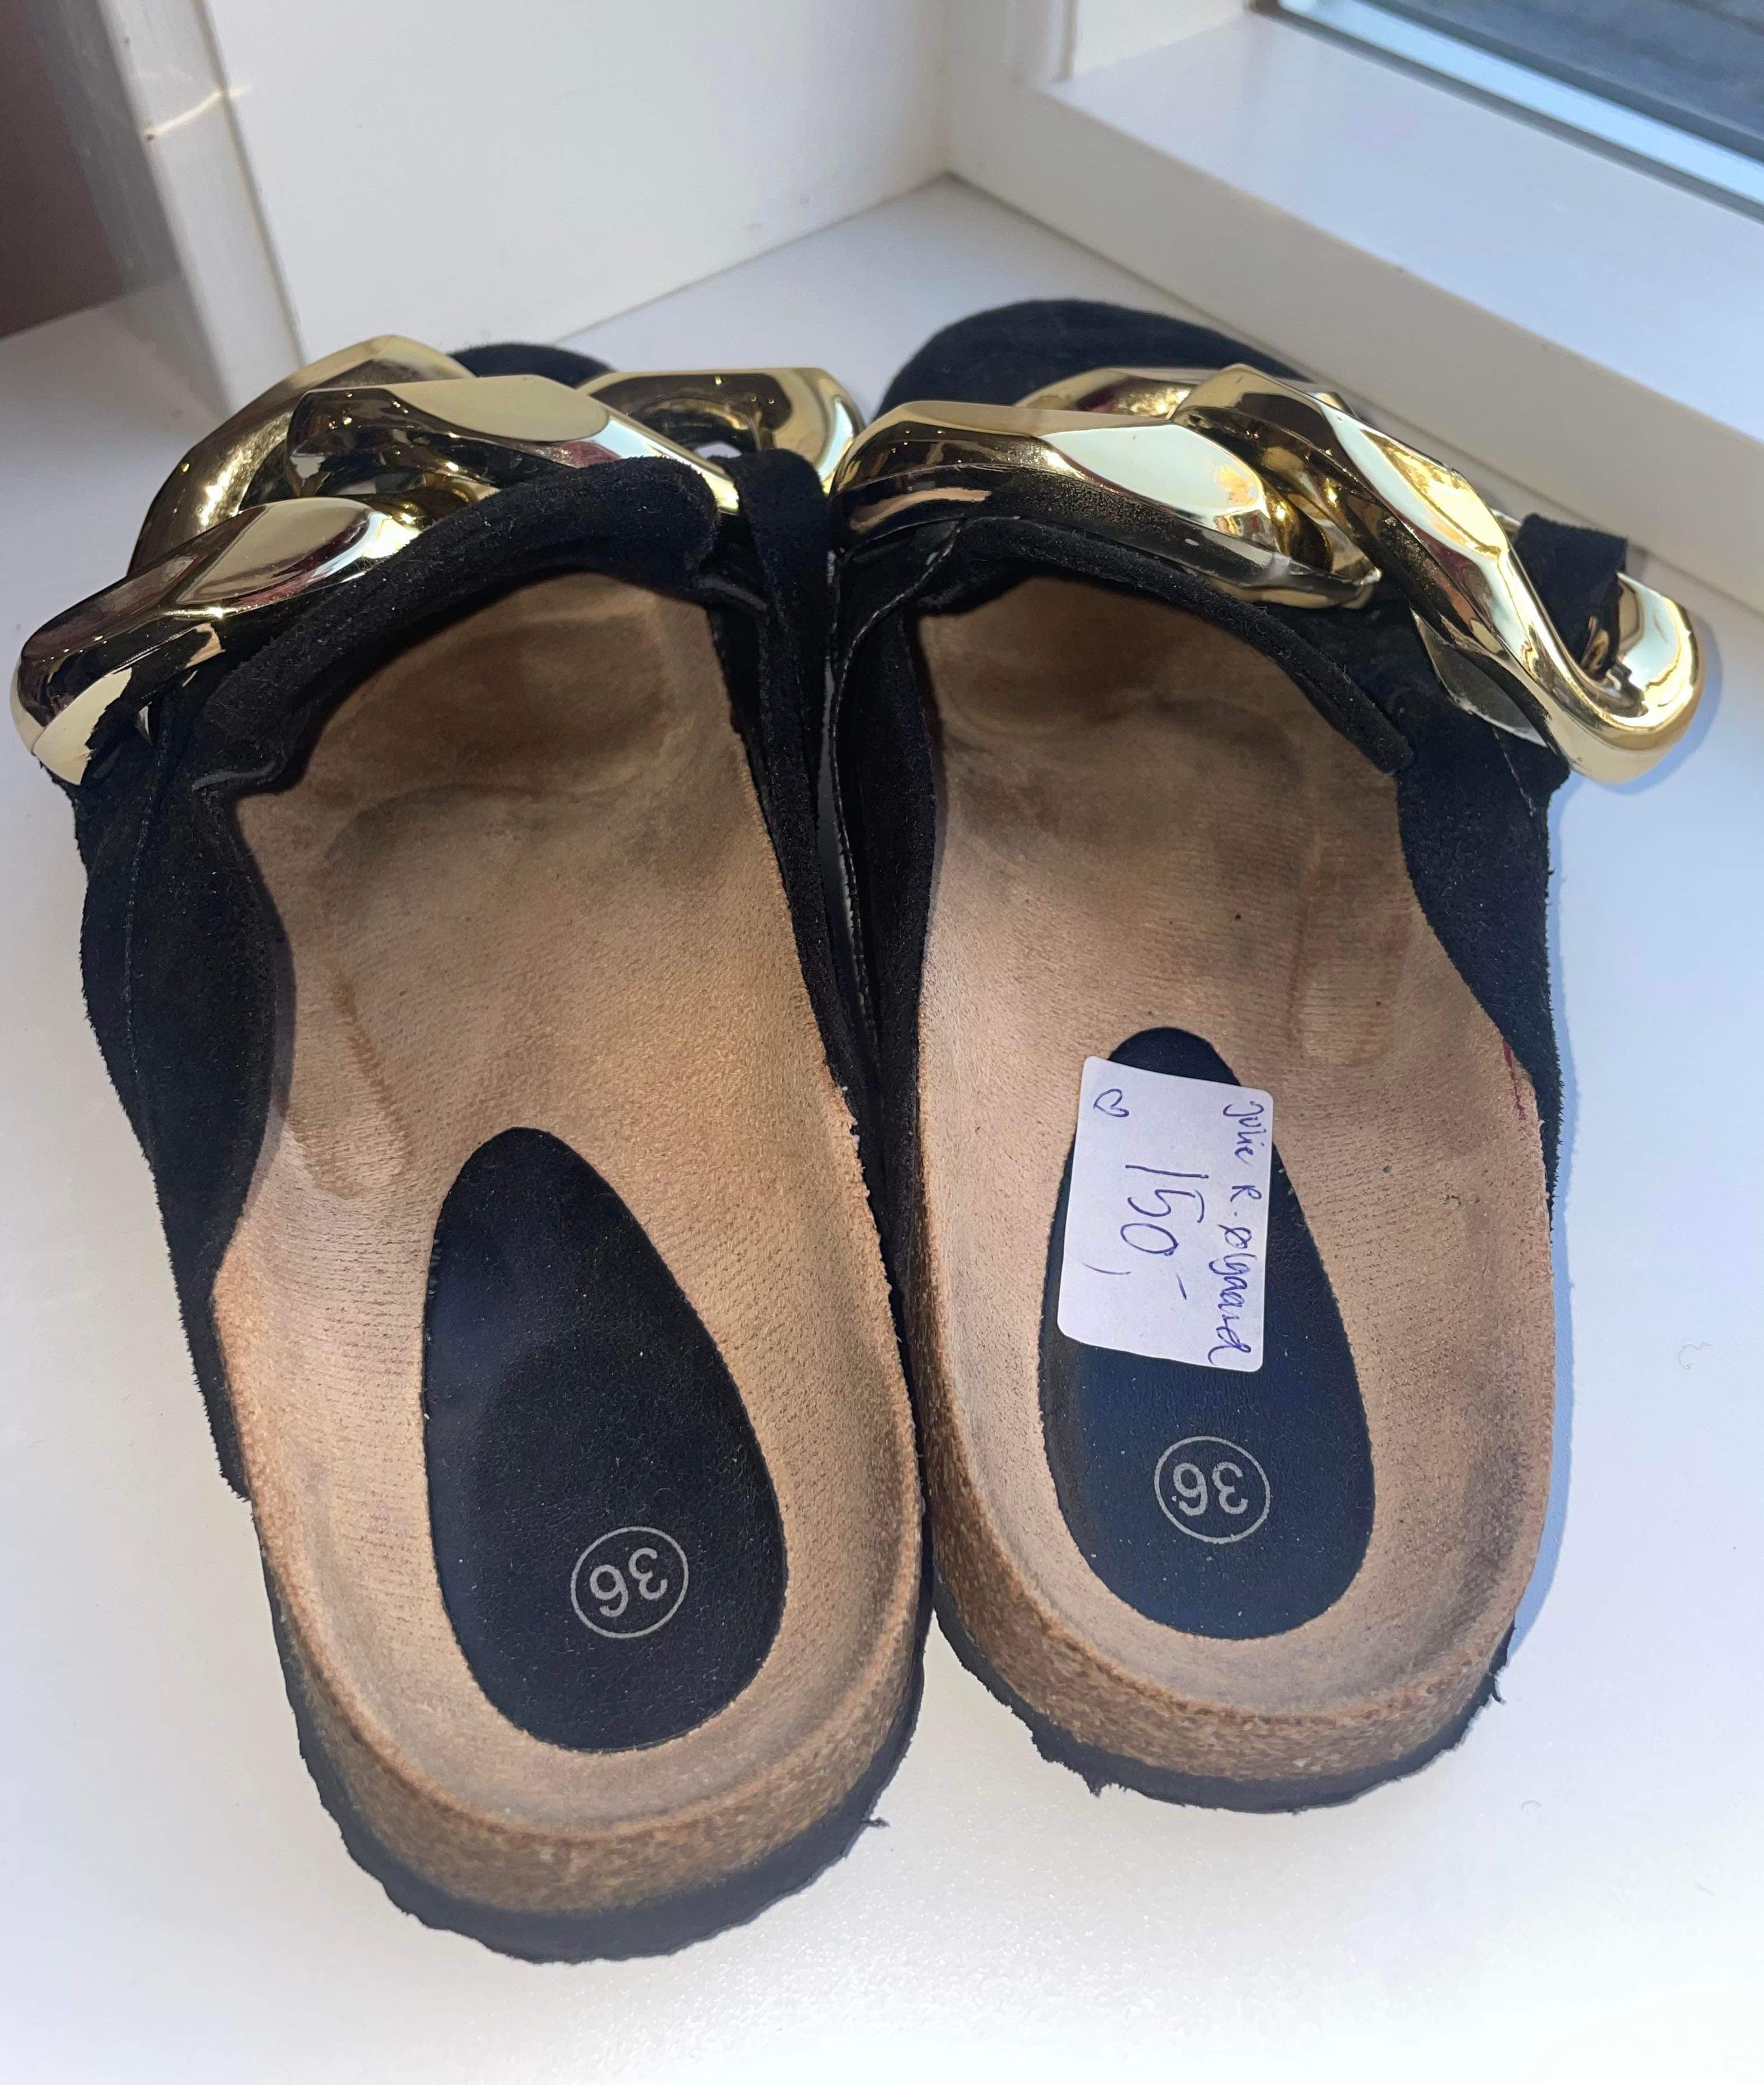 No brand - Slippers - Size: 36